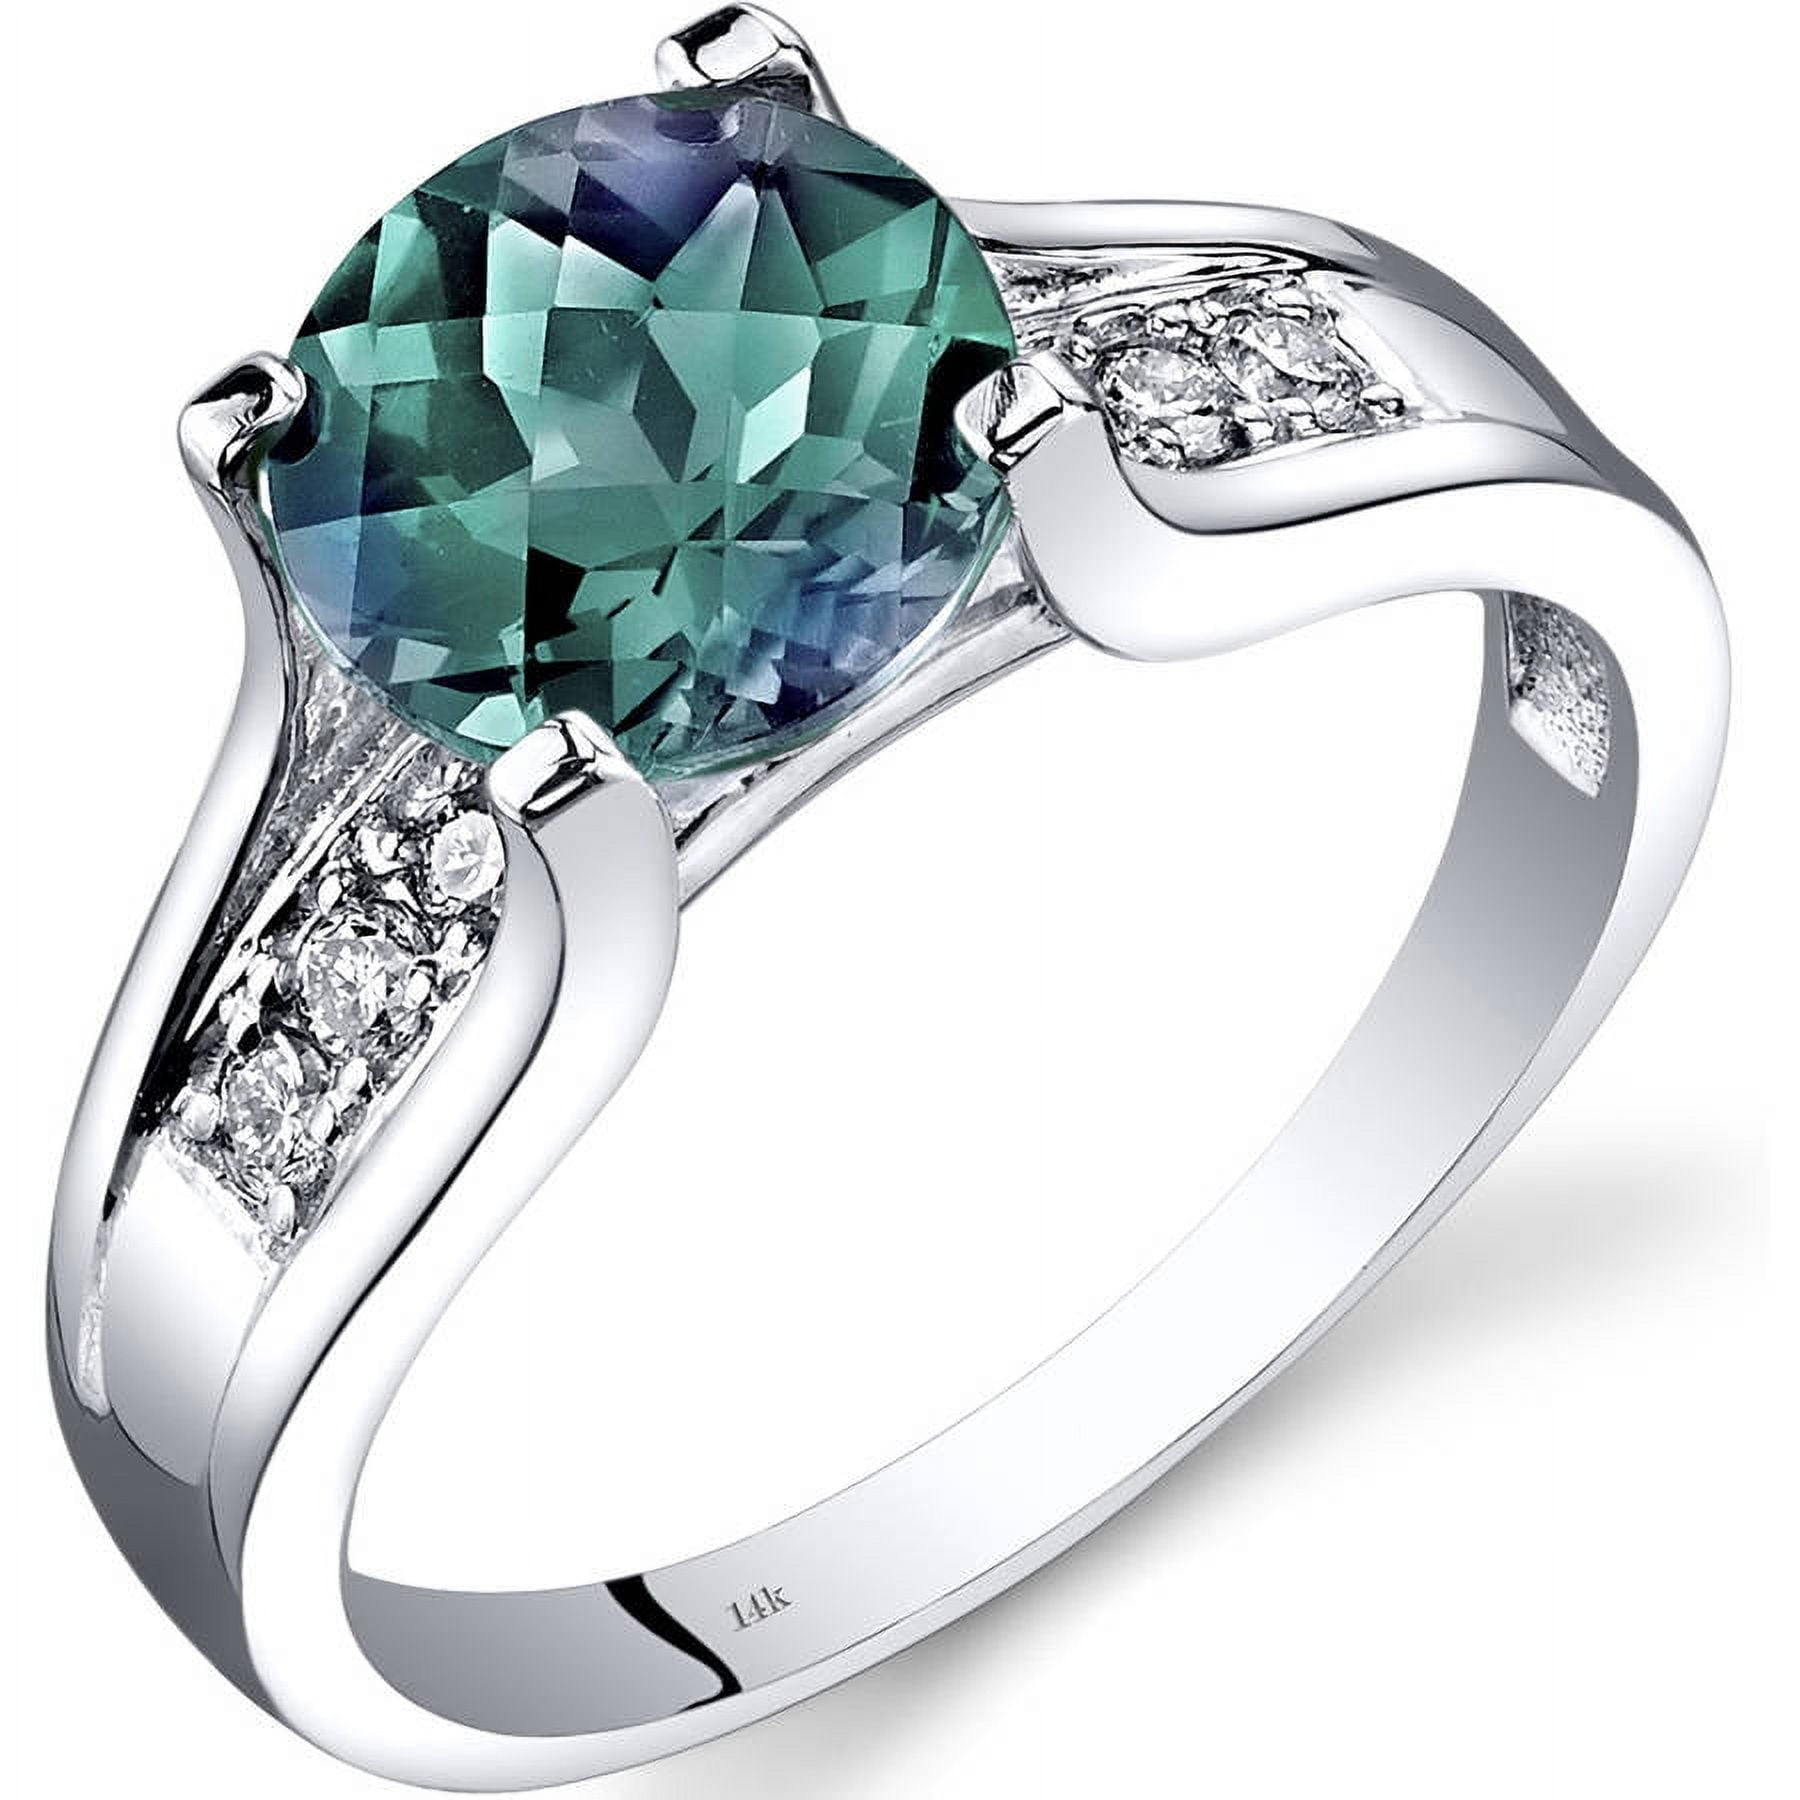 2.25 ct Round Created Alexandrite Solitaire Ring with Diamond in